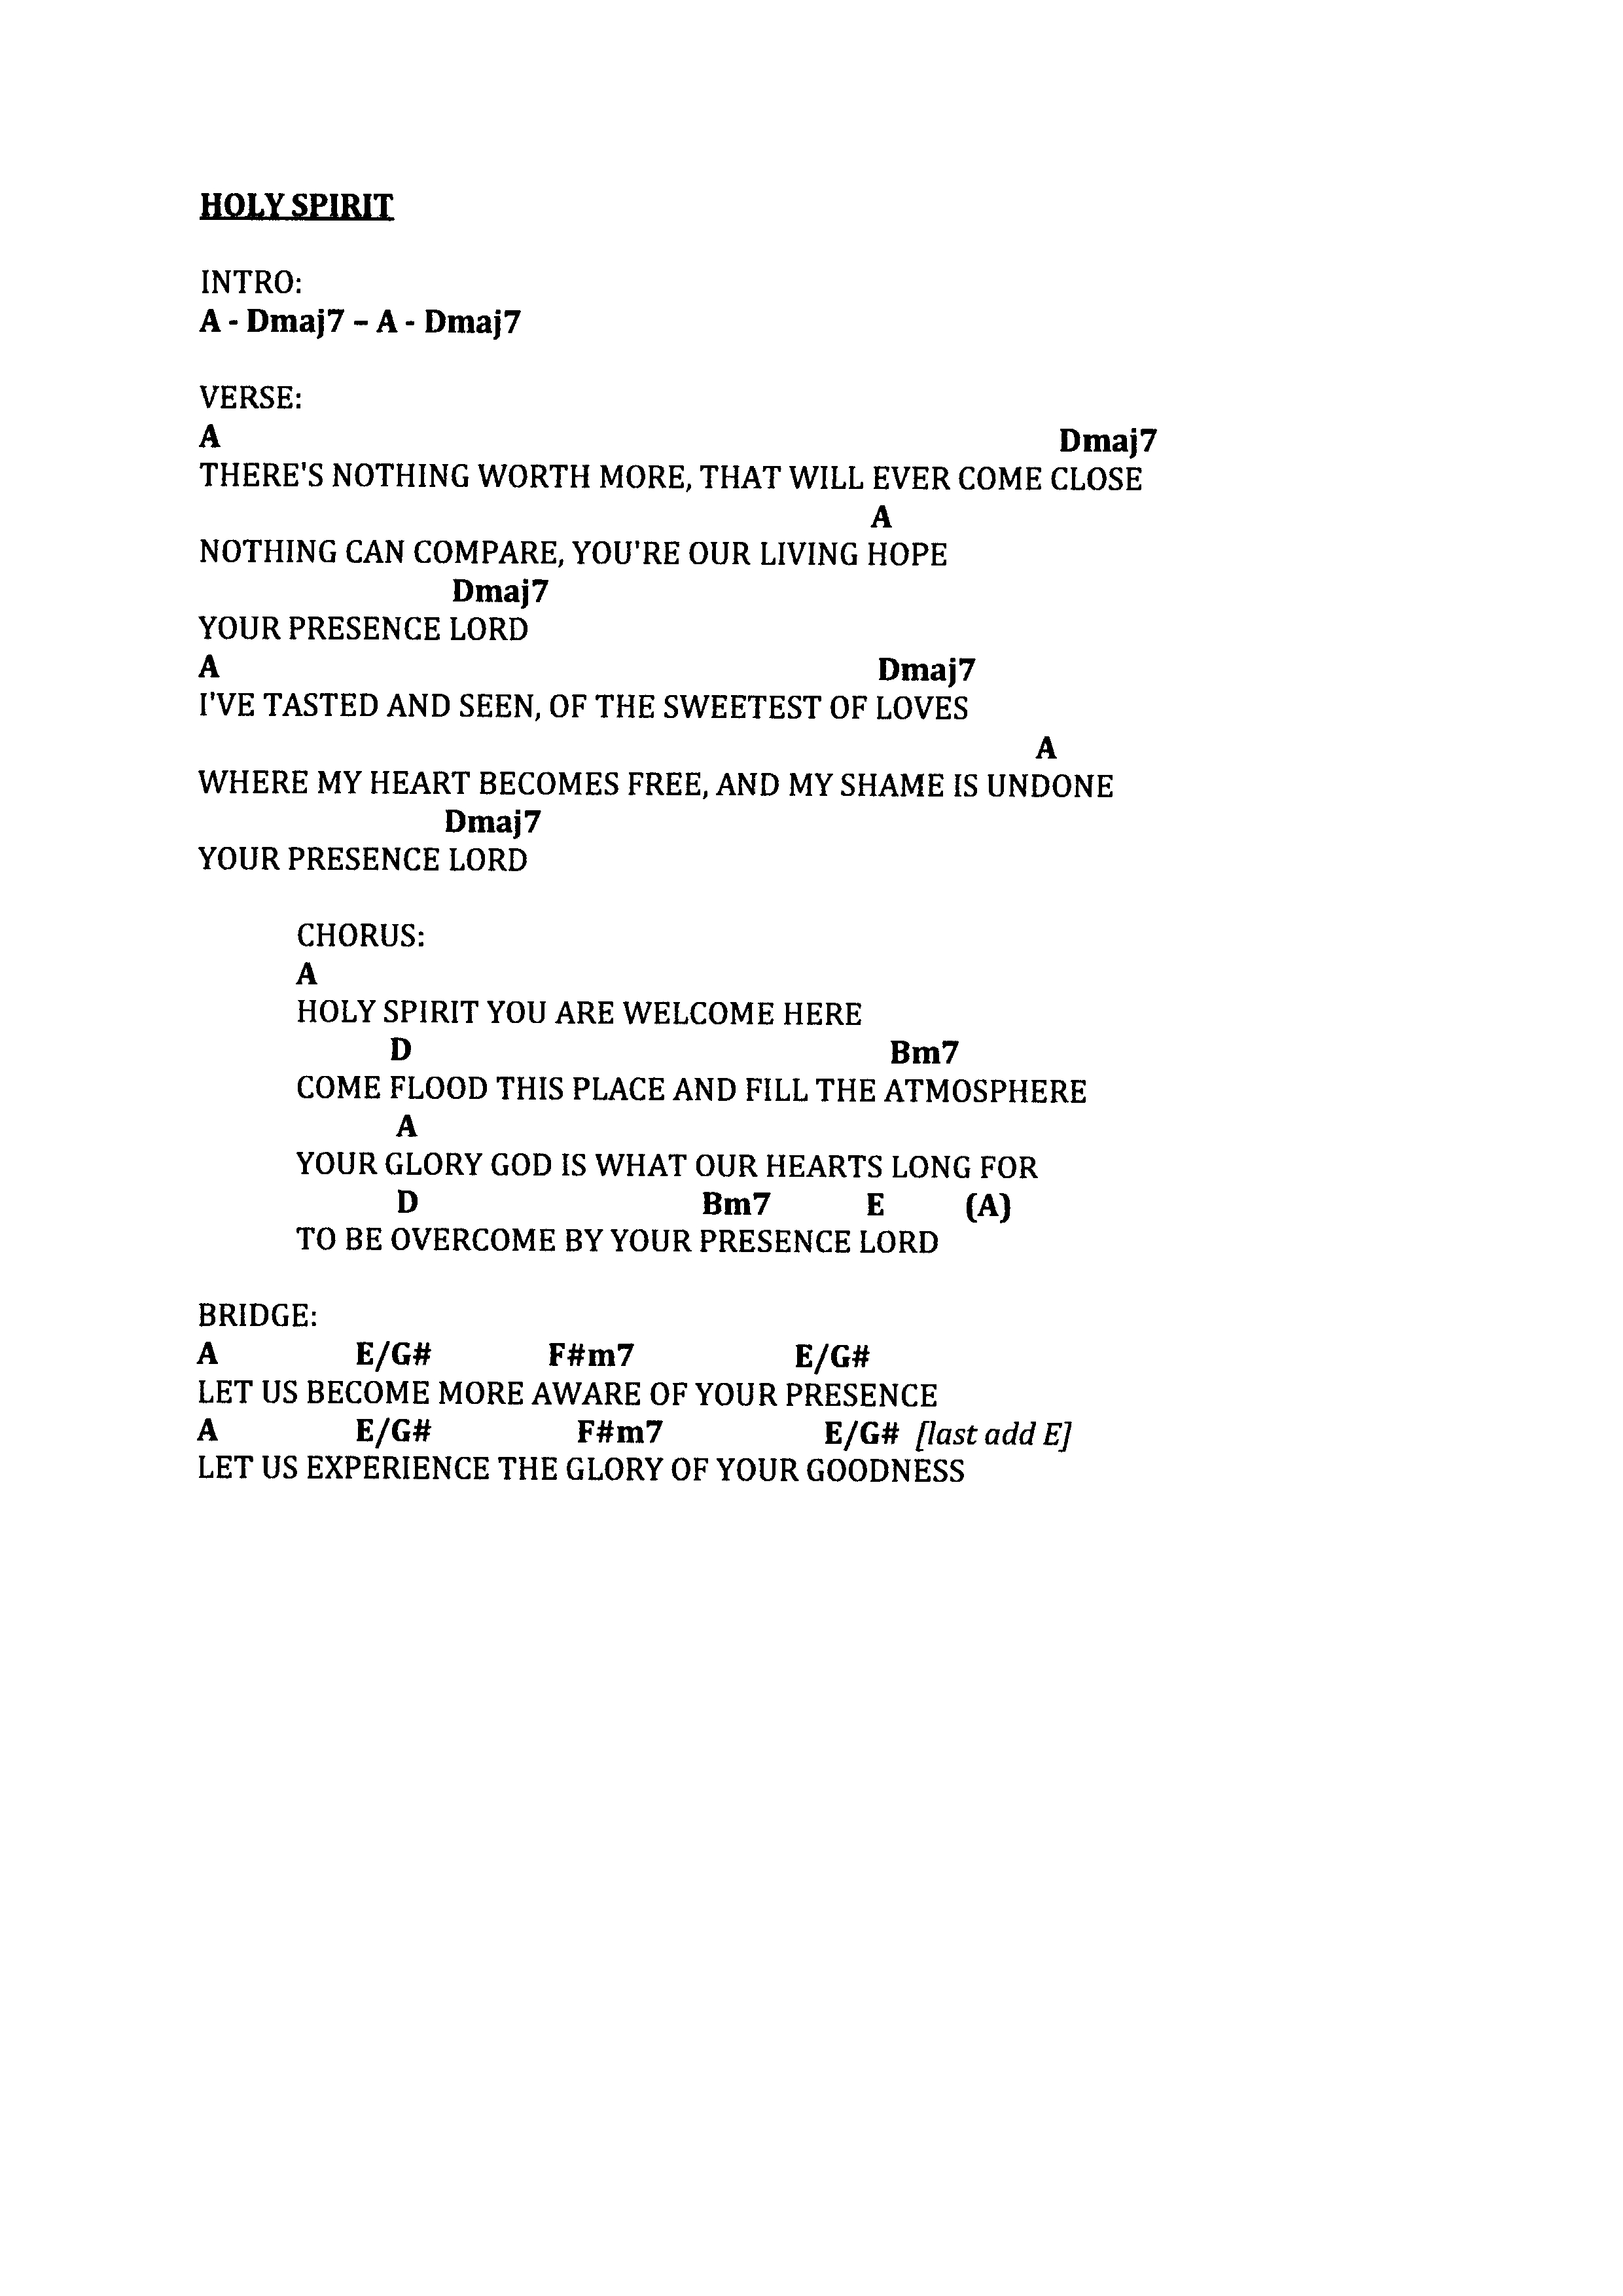 Set A Fire Chords The Idiot In Me Page 2 This Is All About John You Know If You